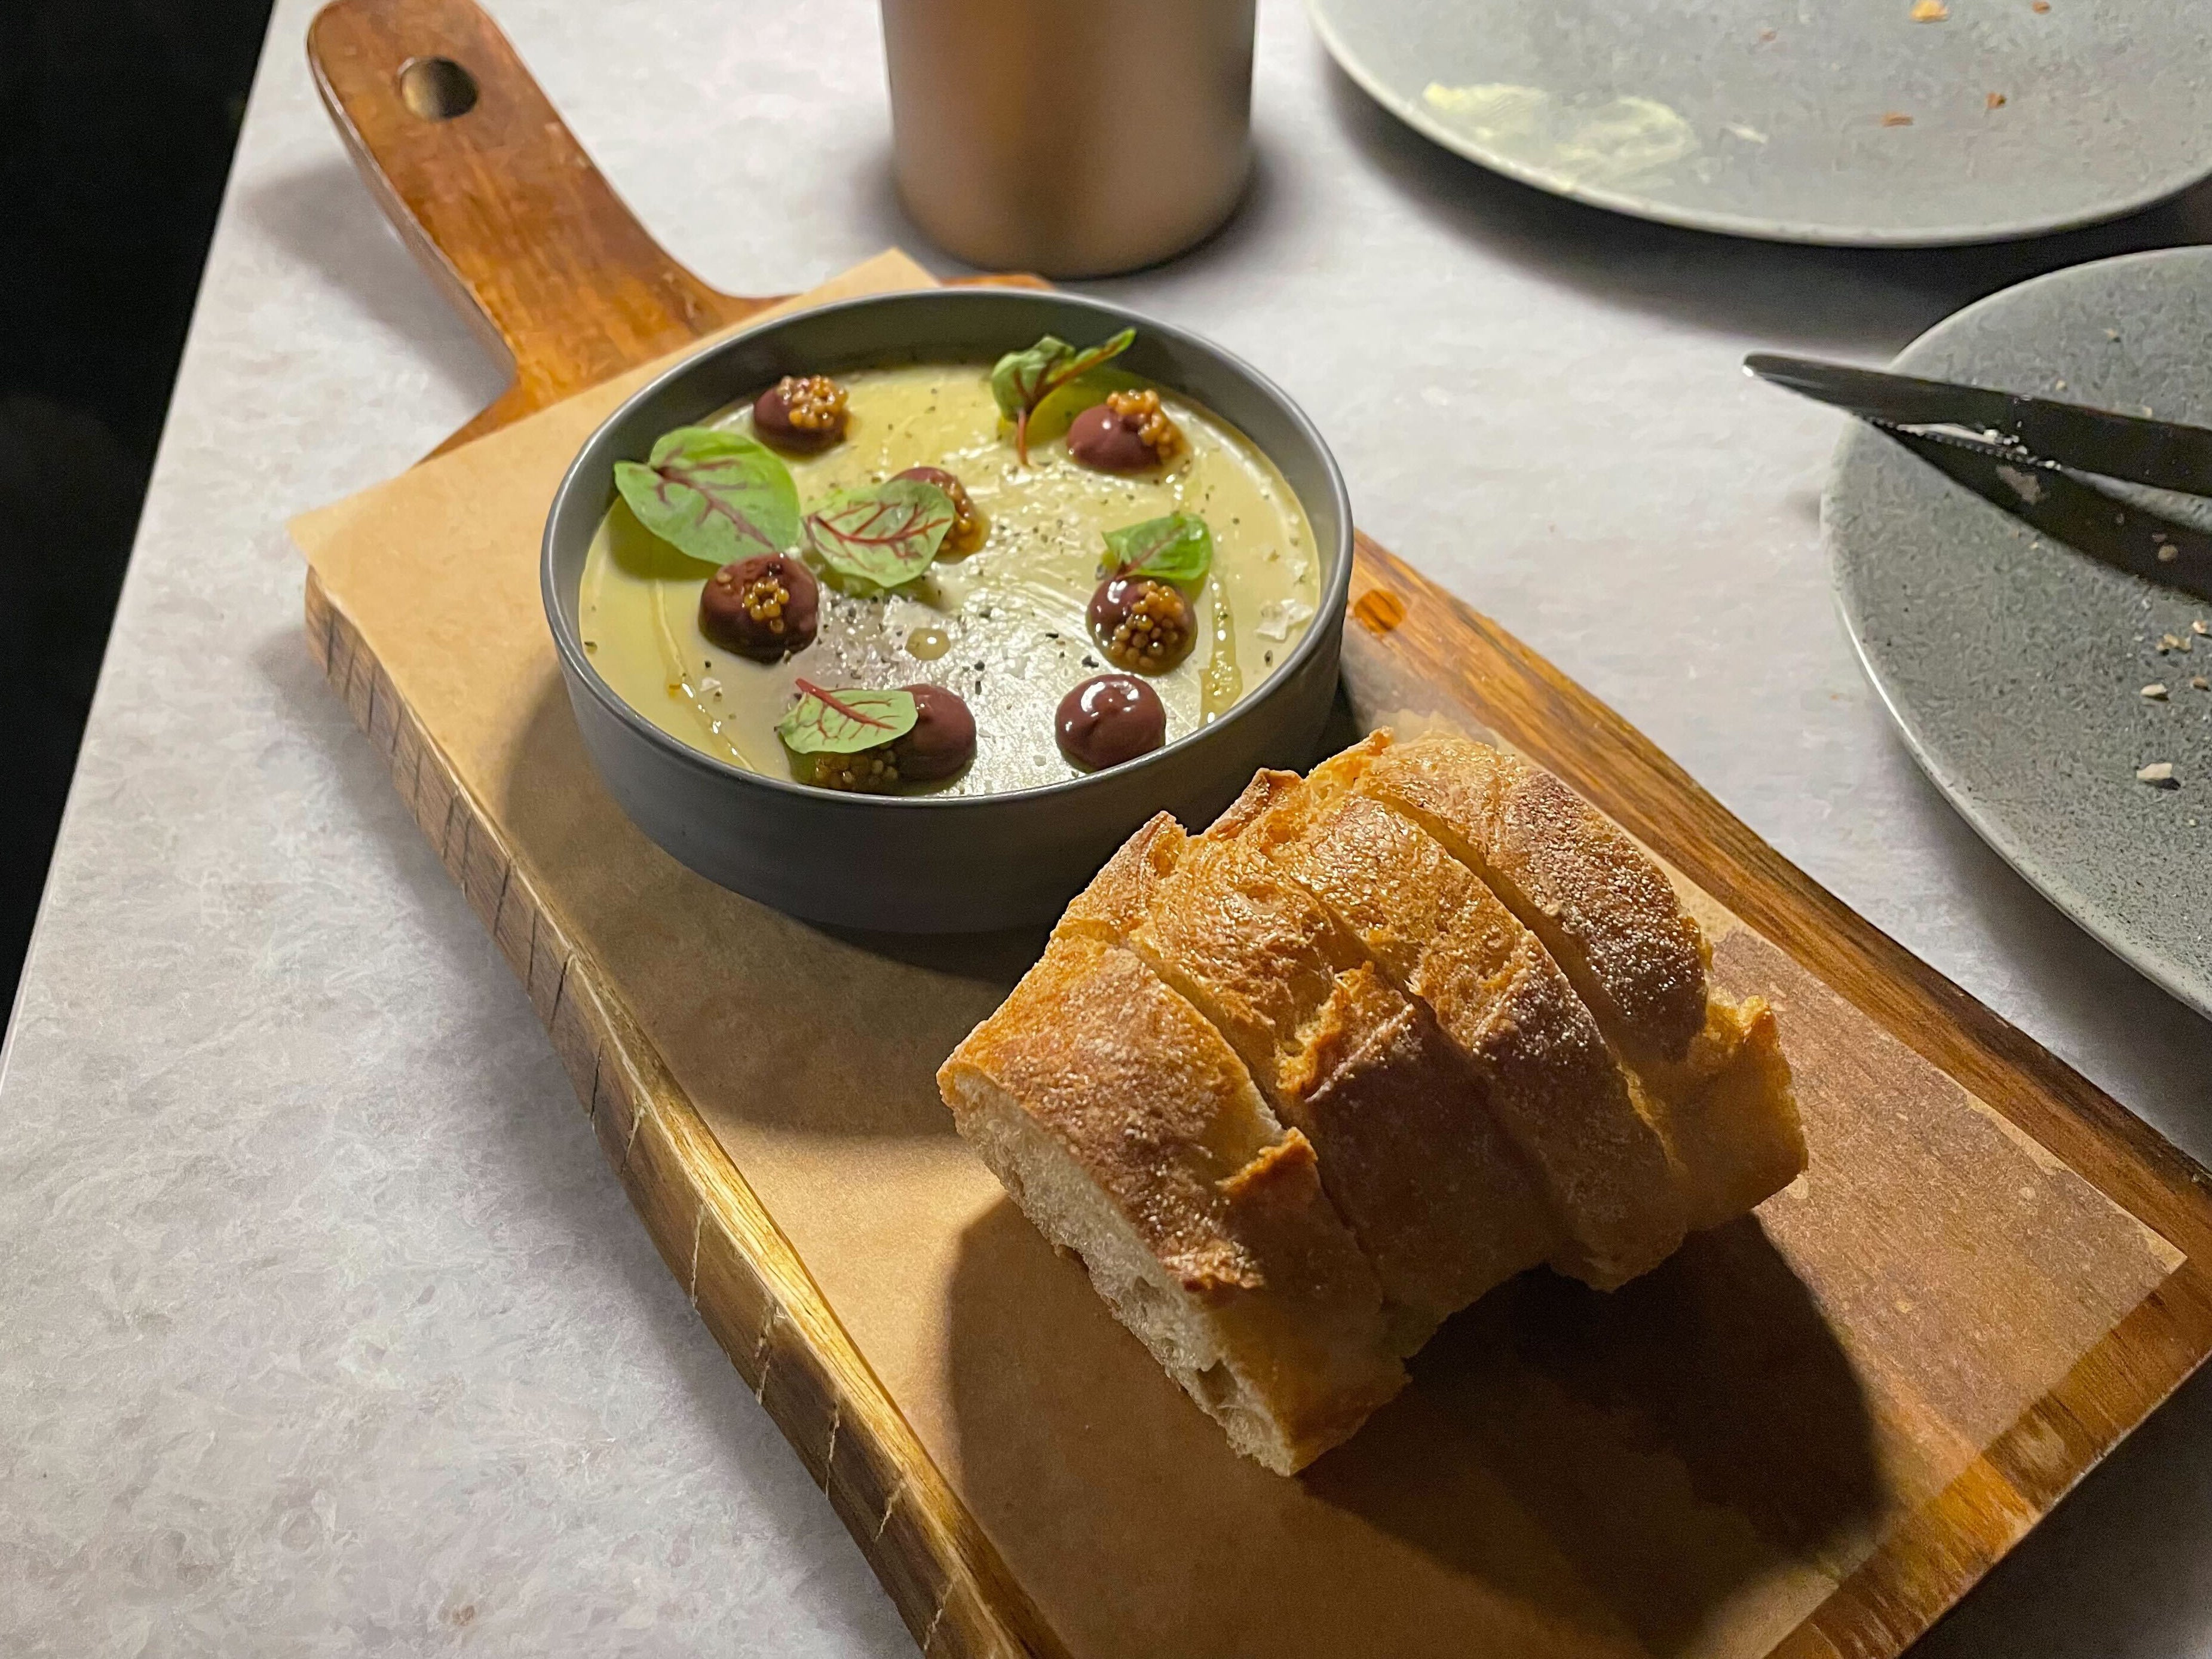 Duck liver parfait: beautifully presented, cold and bland